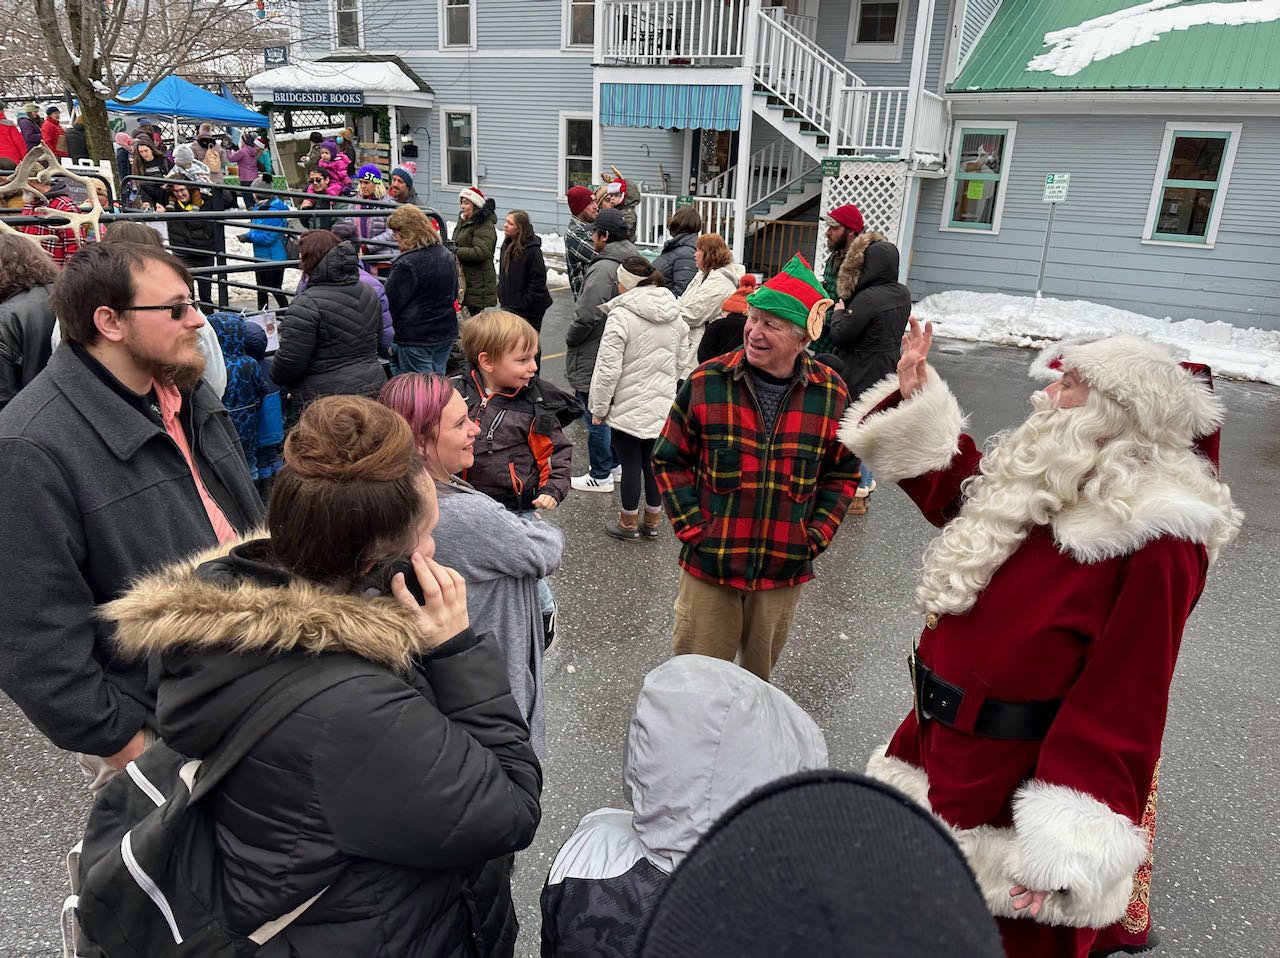   Hosted by Stowe Street Cafe, Santa Fin (a.k.a. Finbar Ciaparra of Barre) greets young and old outside. A professional special needs Santa, Santa Fin delights people around Central Vermont at the holidays. He was a guest of honor in the 2021 River o